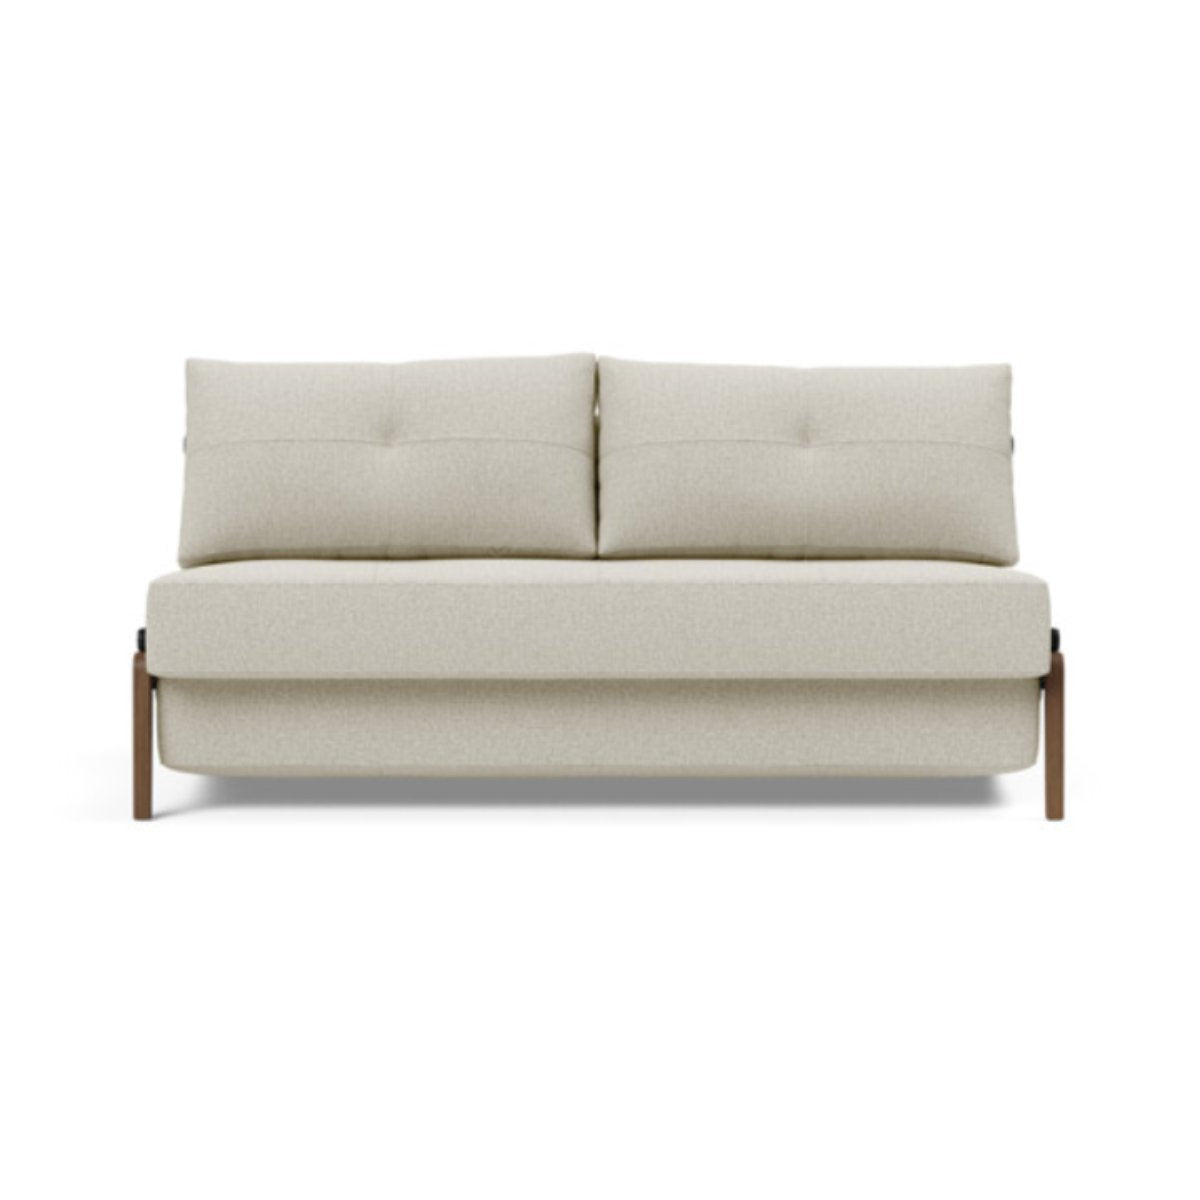 Load image into Gallery viewer, Cubed Queen Size Sofa Bed With Dark Wood Legs 527 Mixed Dance NaturalSofa Beds INNOVATION  527 Mixed Dance Natural   Four Hands, Burke Decor, Mid Century Modern Furniture, Old Bones Furniture Company, Old Bones Co, Modern Mid Century, Designer Furniture, https://www.oldbonesco.com/
